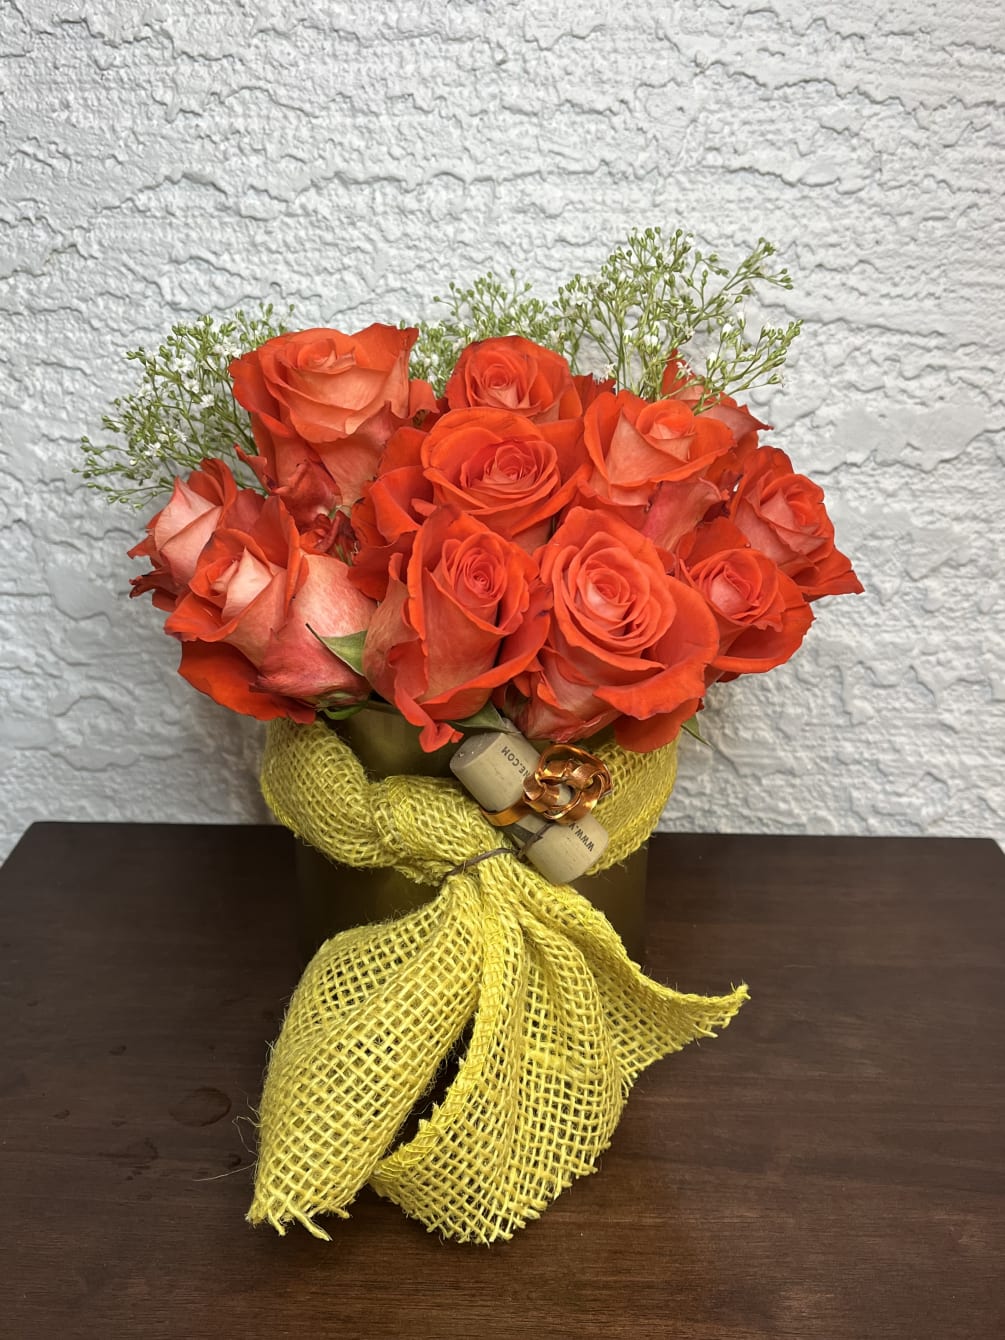 18 Orange roses
With our special and unique creations we want to touch